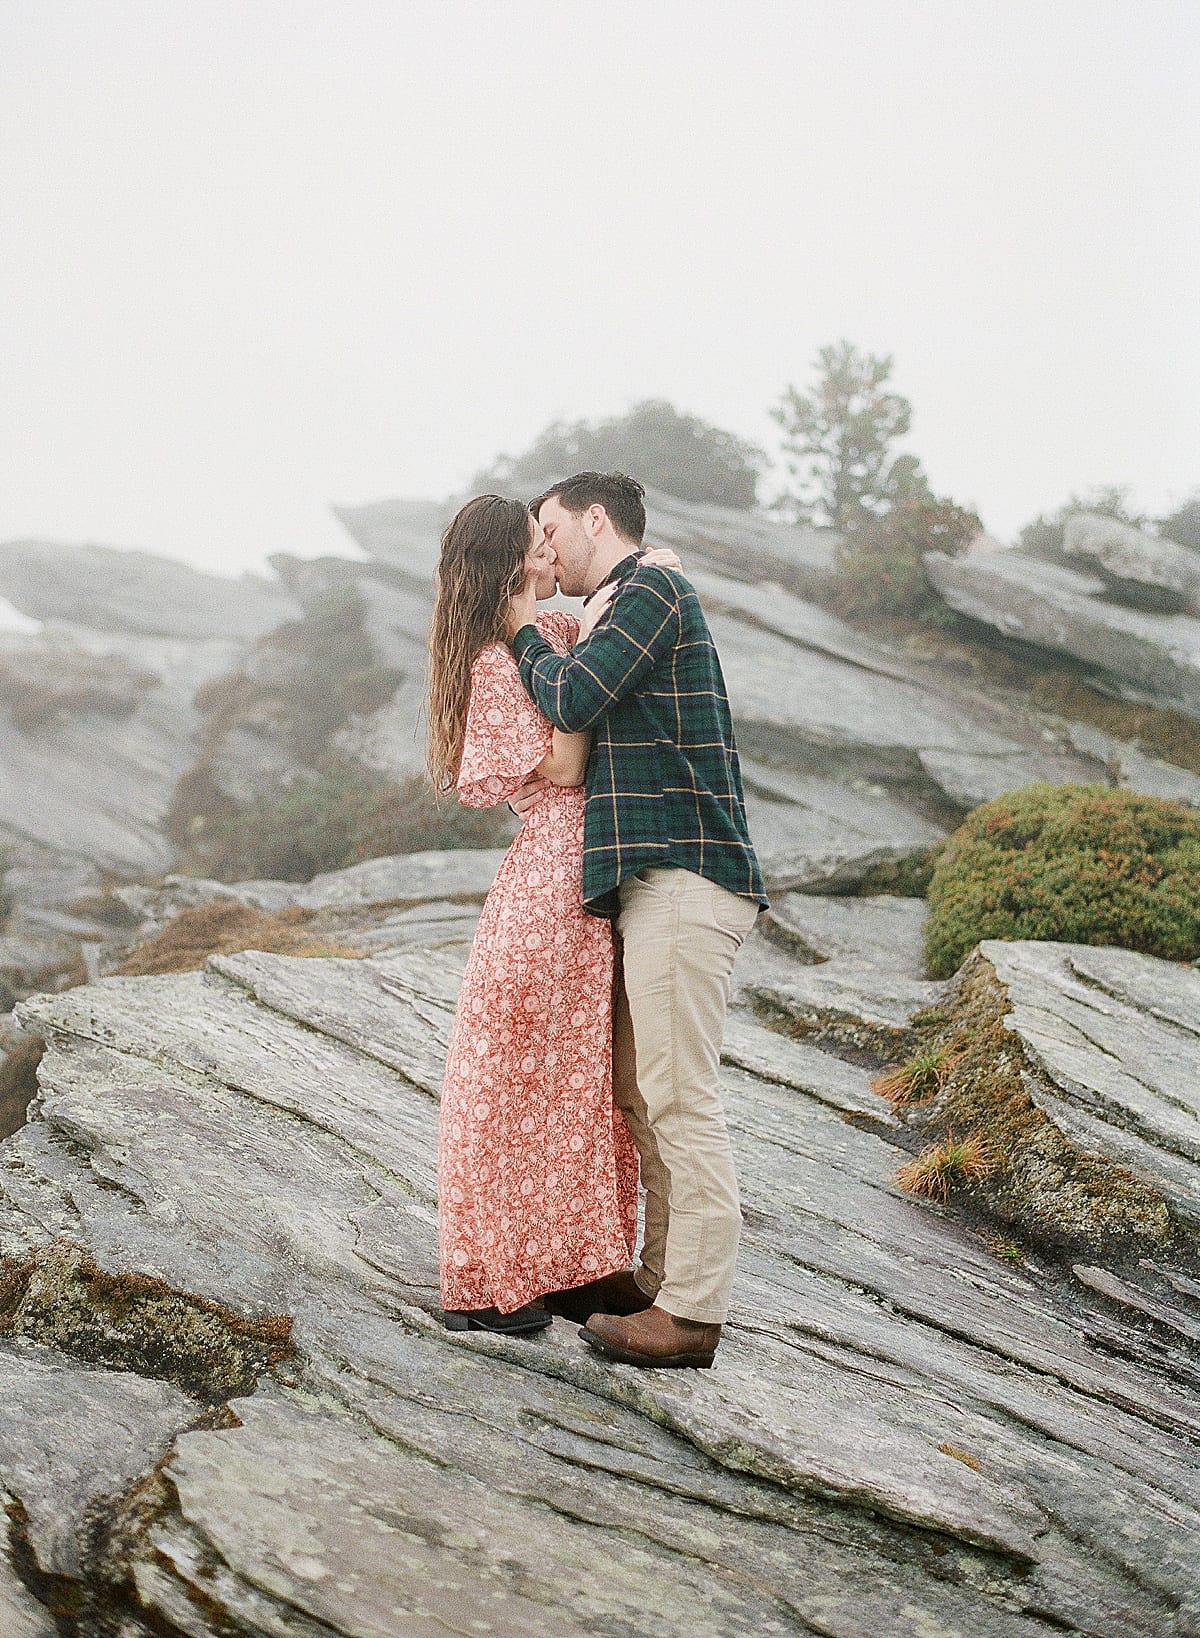 Couple on Rock in Linville Gorge Kissing Photo